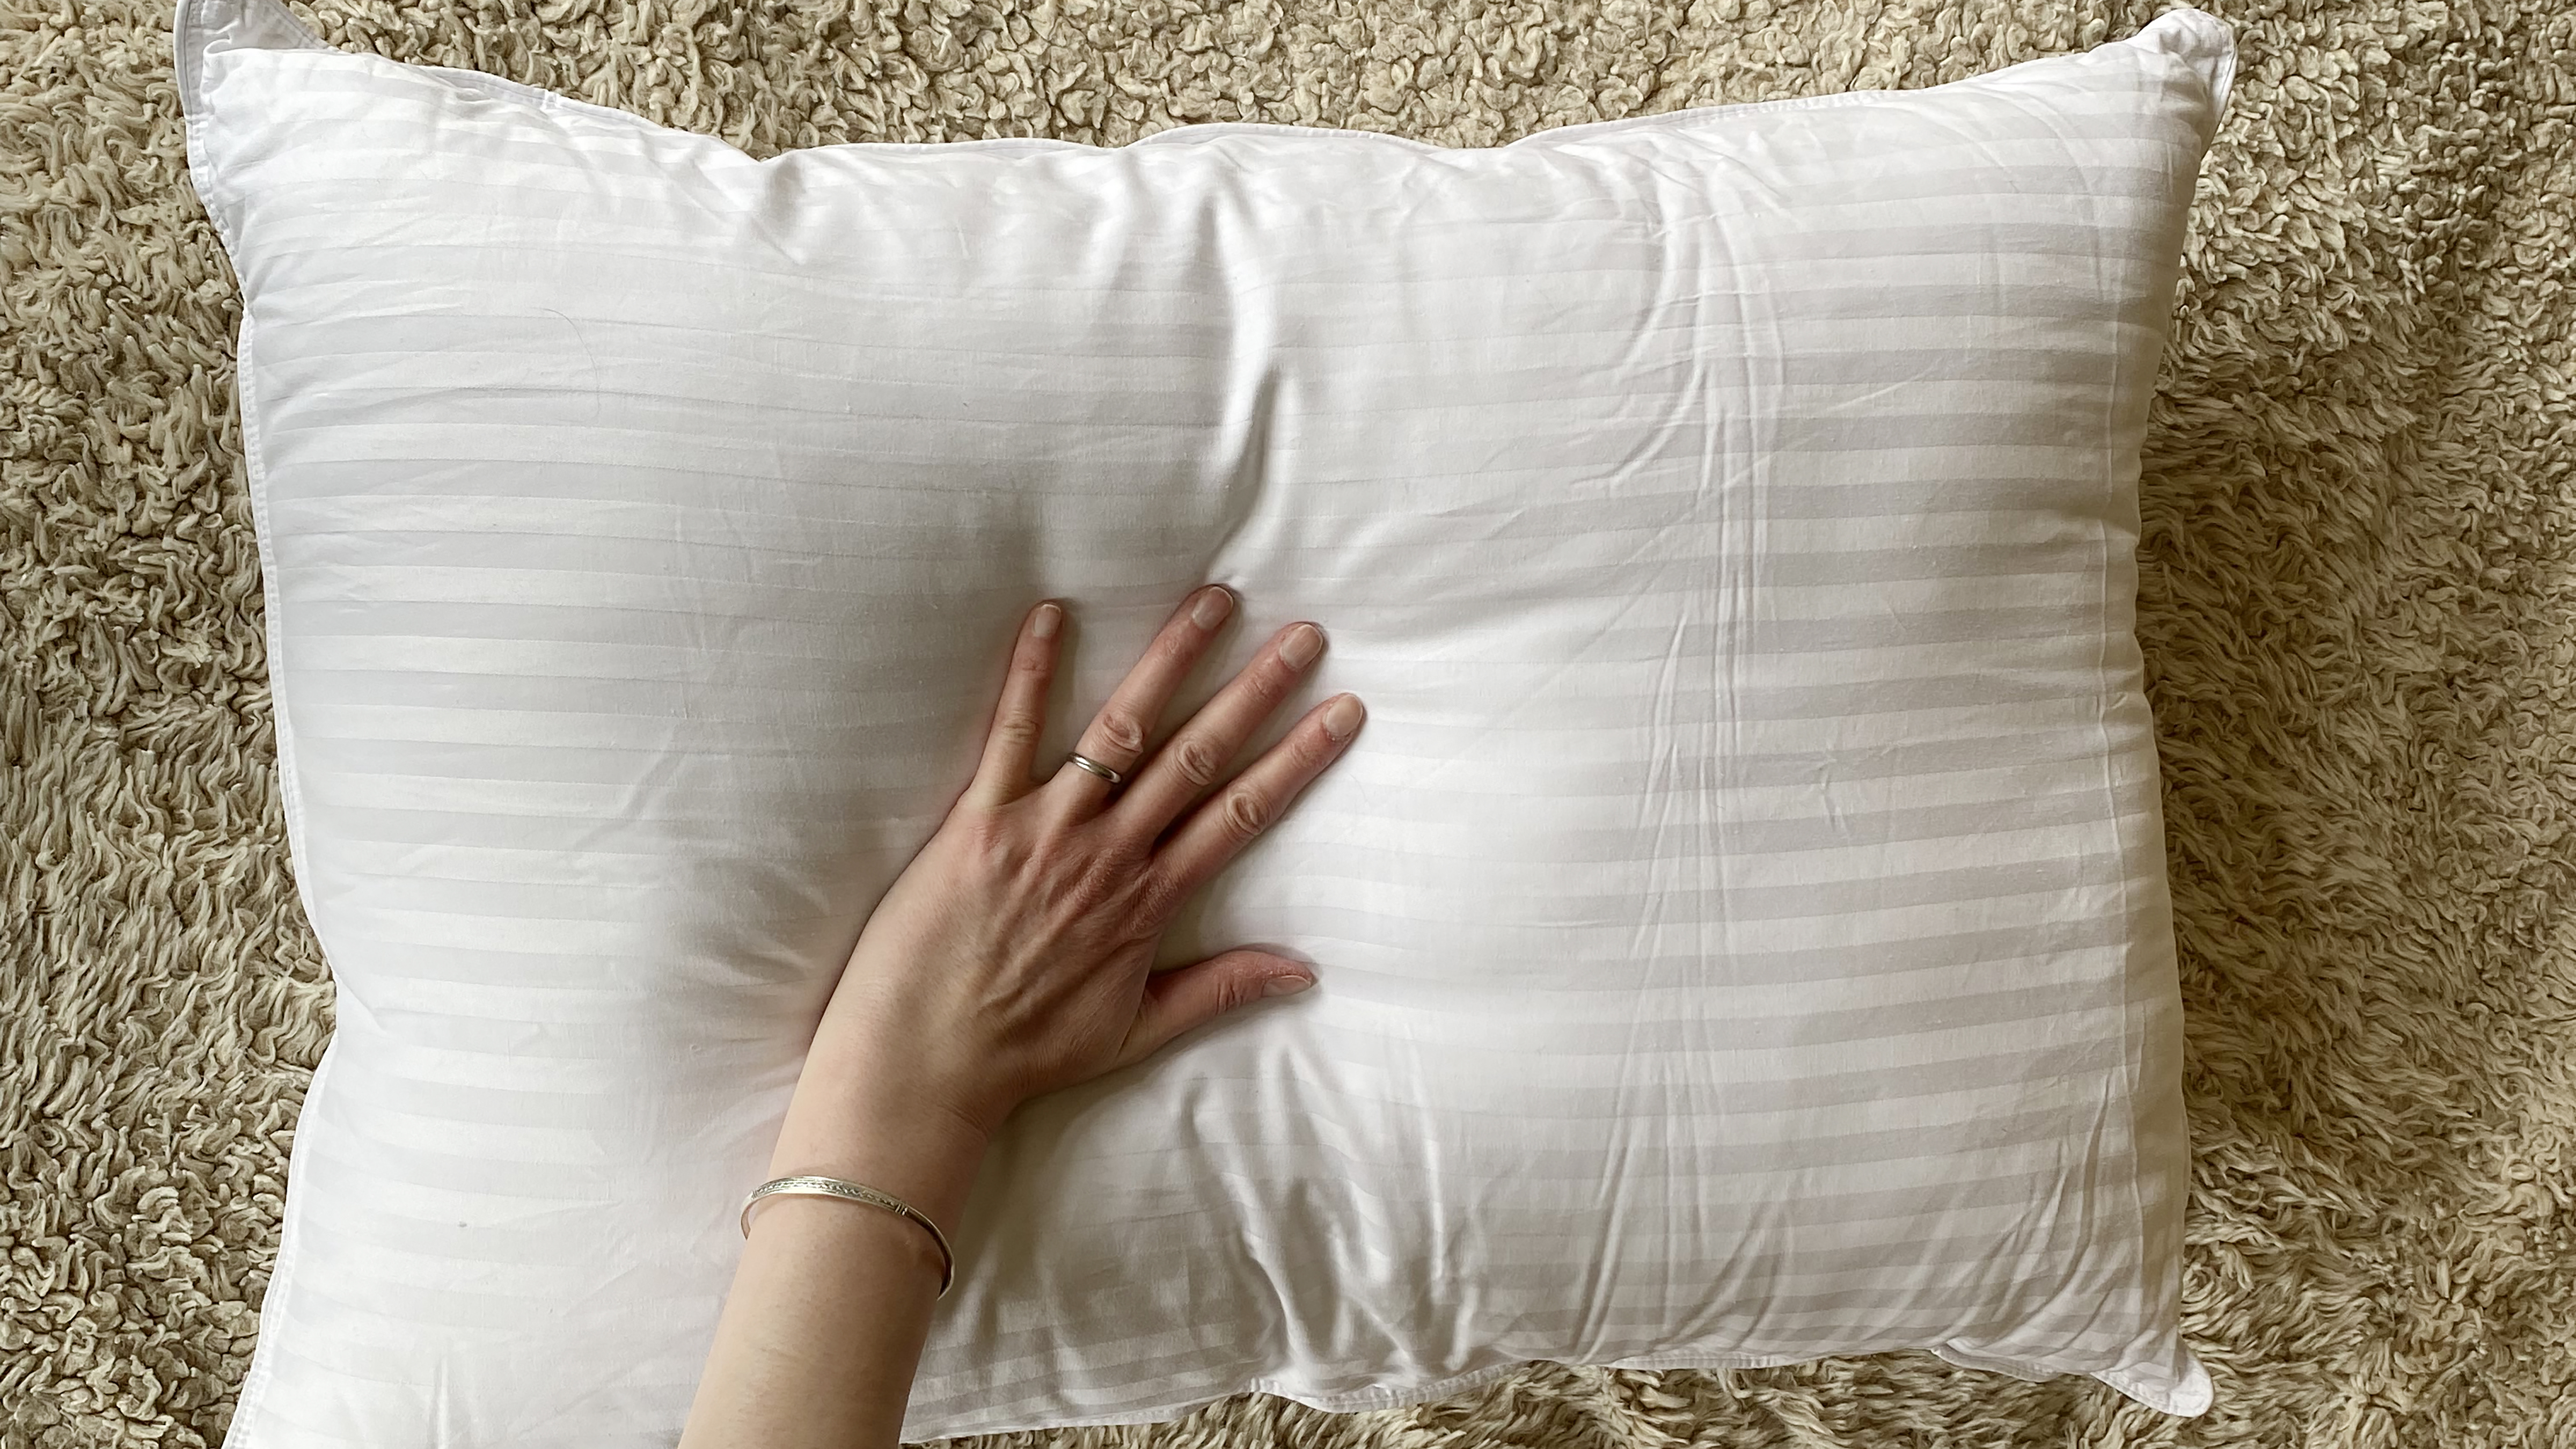 Testing the firmness and comfort of the Beckham Hotel Collection Gel Pillow